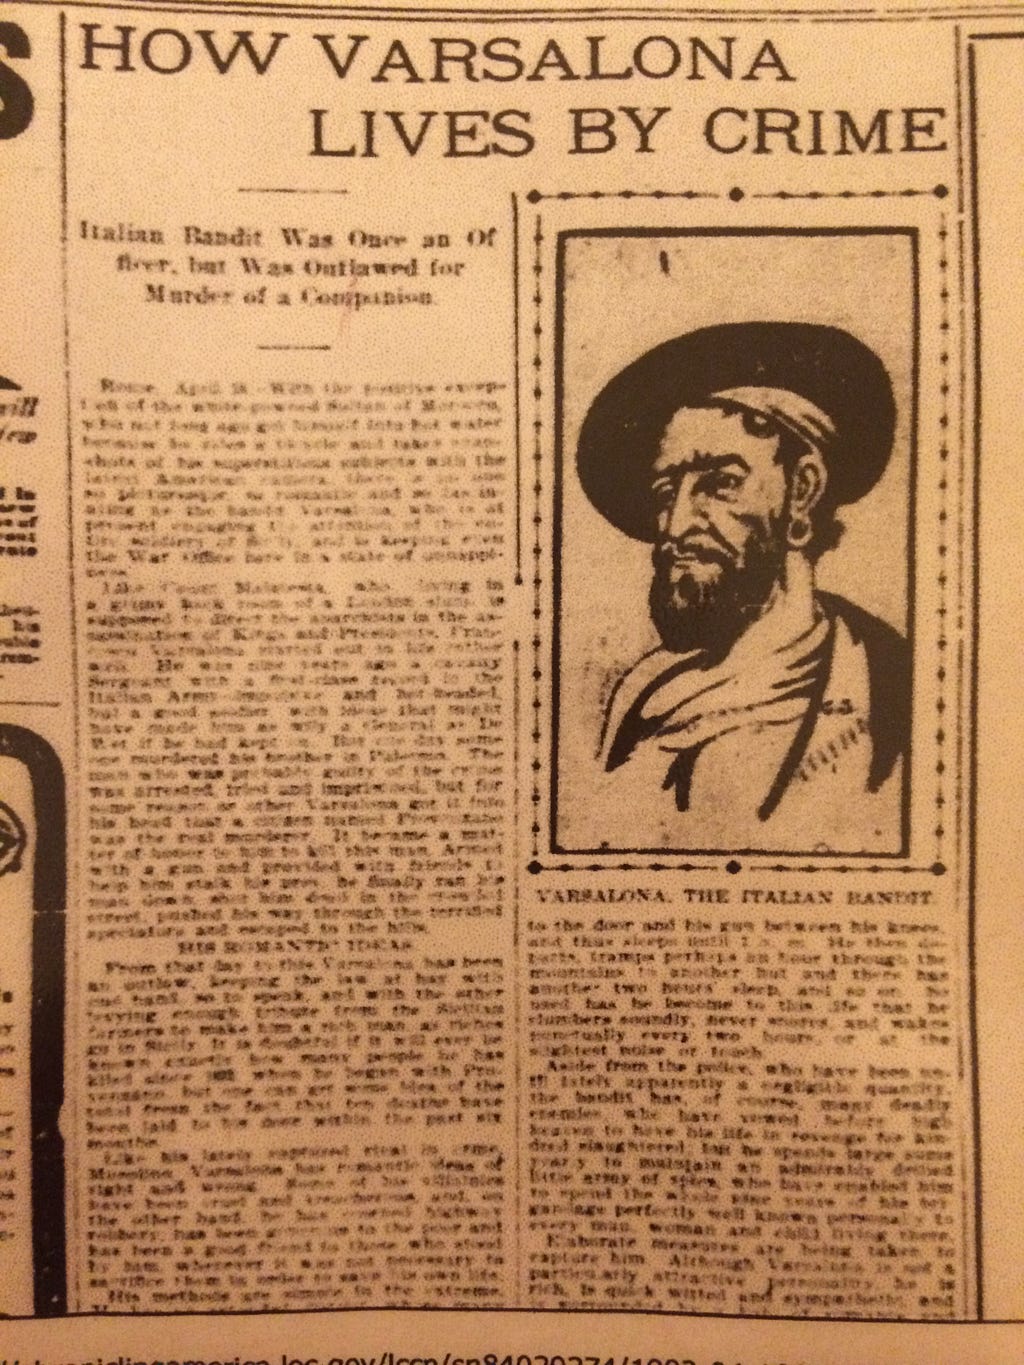 Newspaper article from the early 1900s about Varsalona.